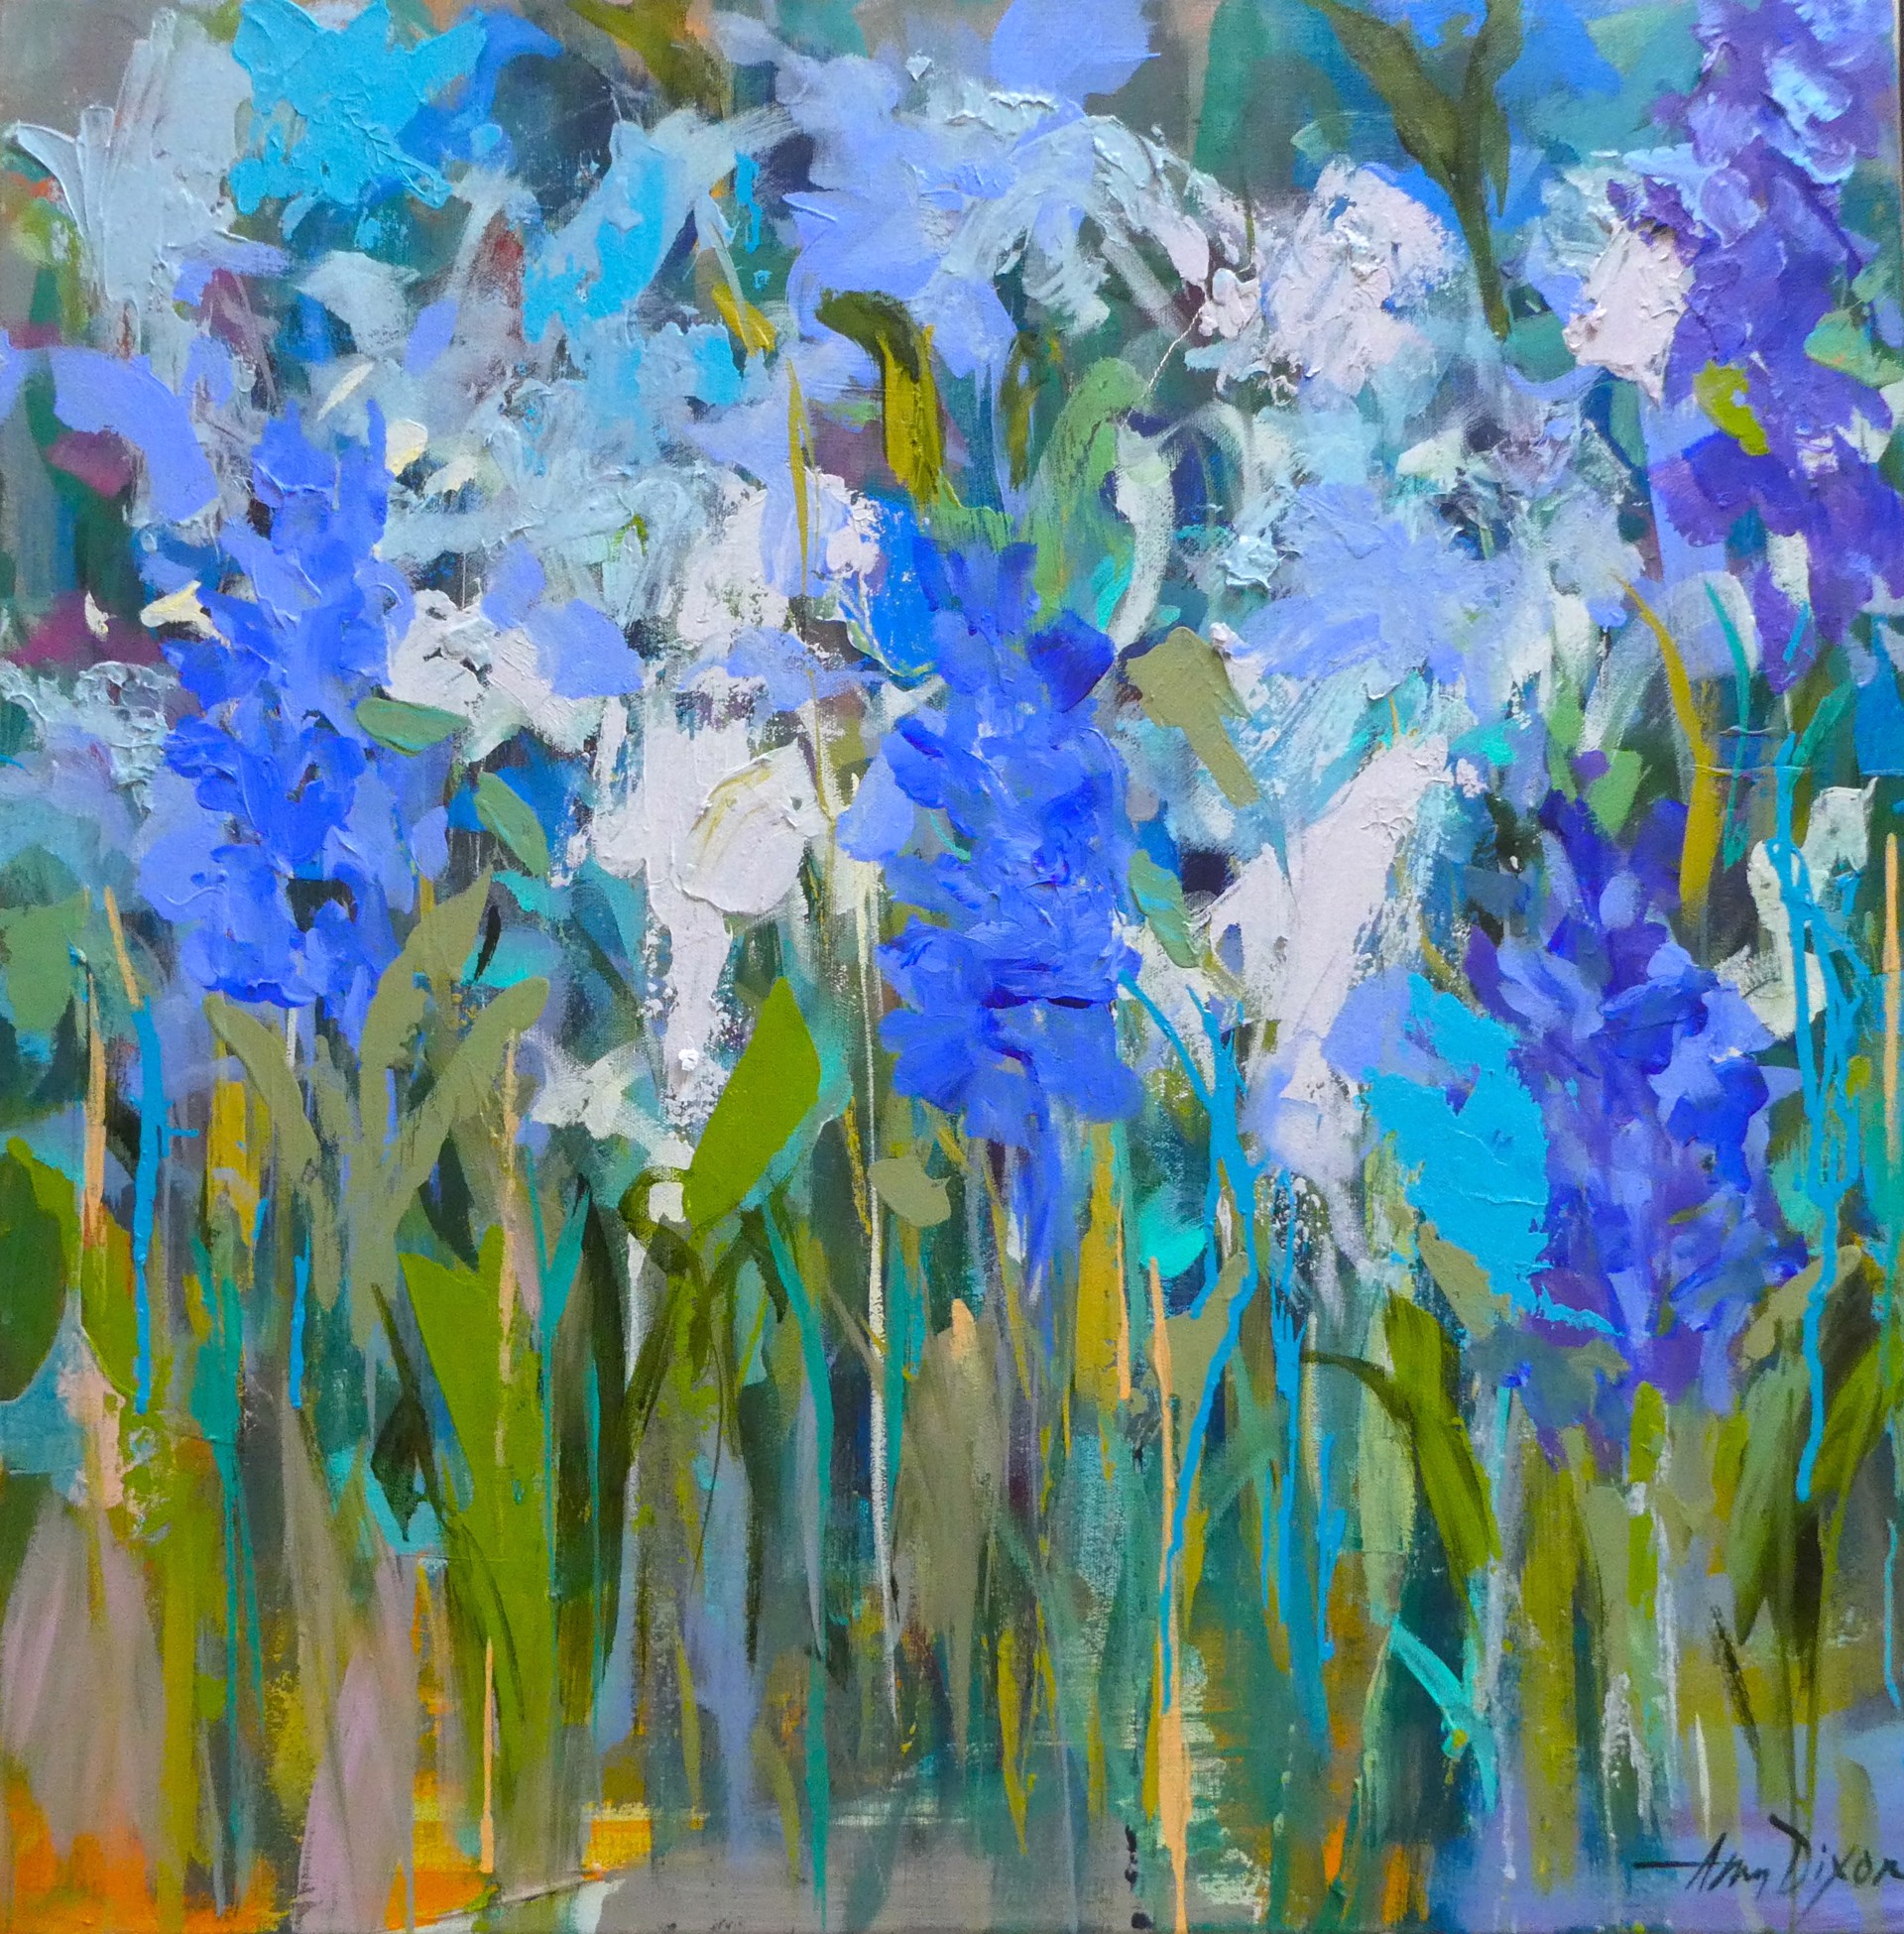 "Rhapsody in Blue" original mixed media painting by Amy Dixon